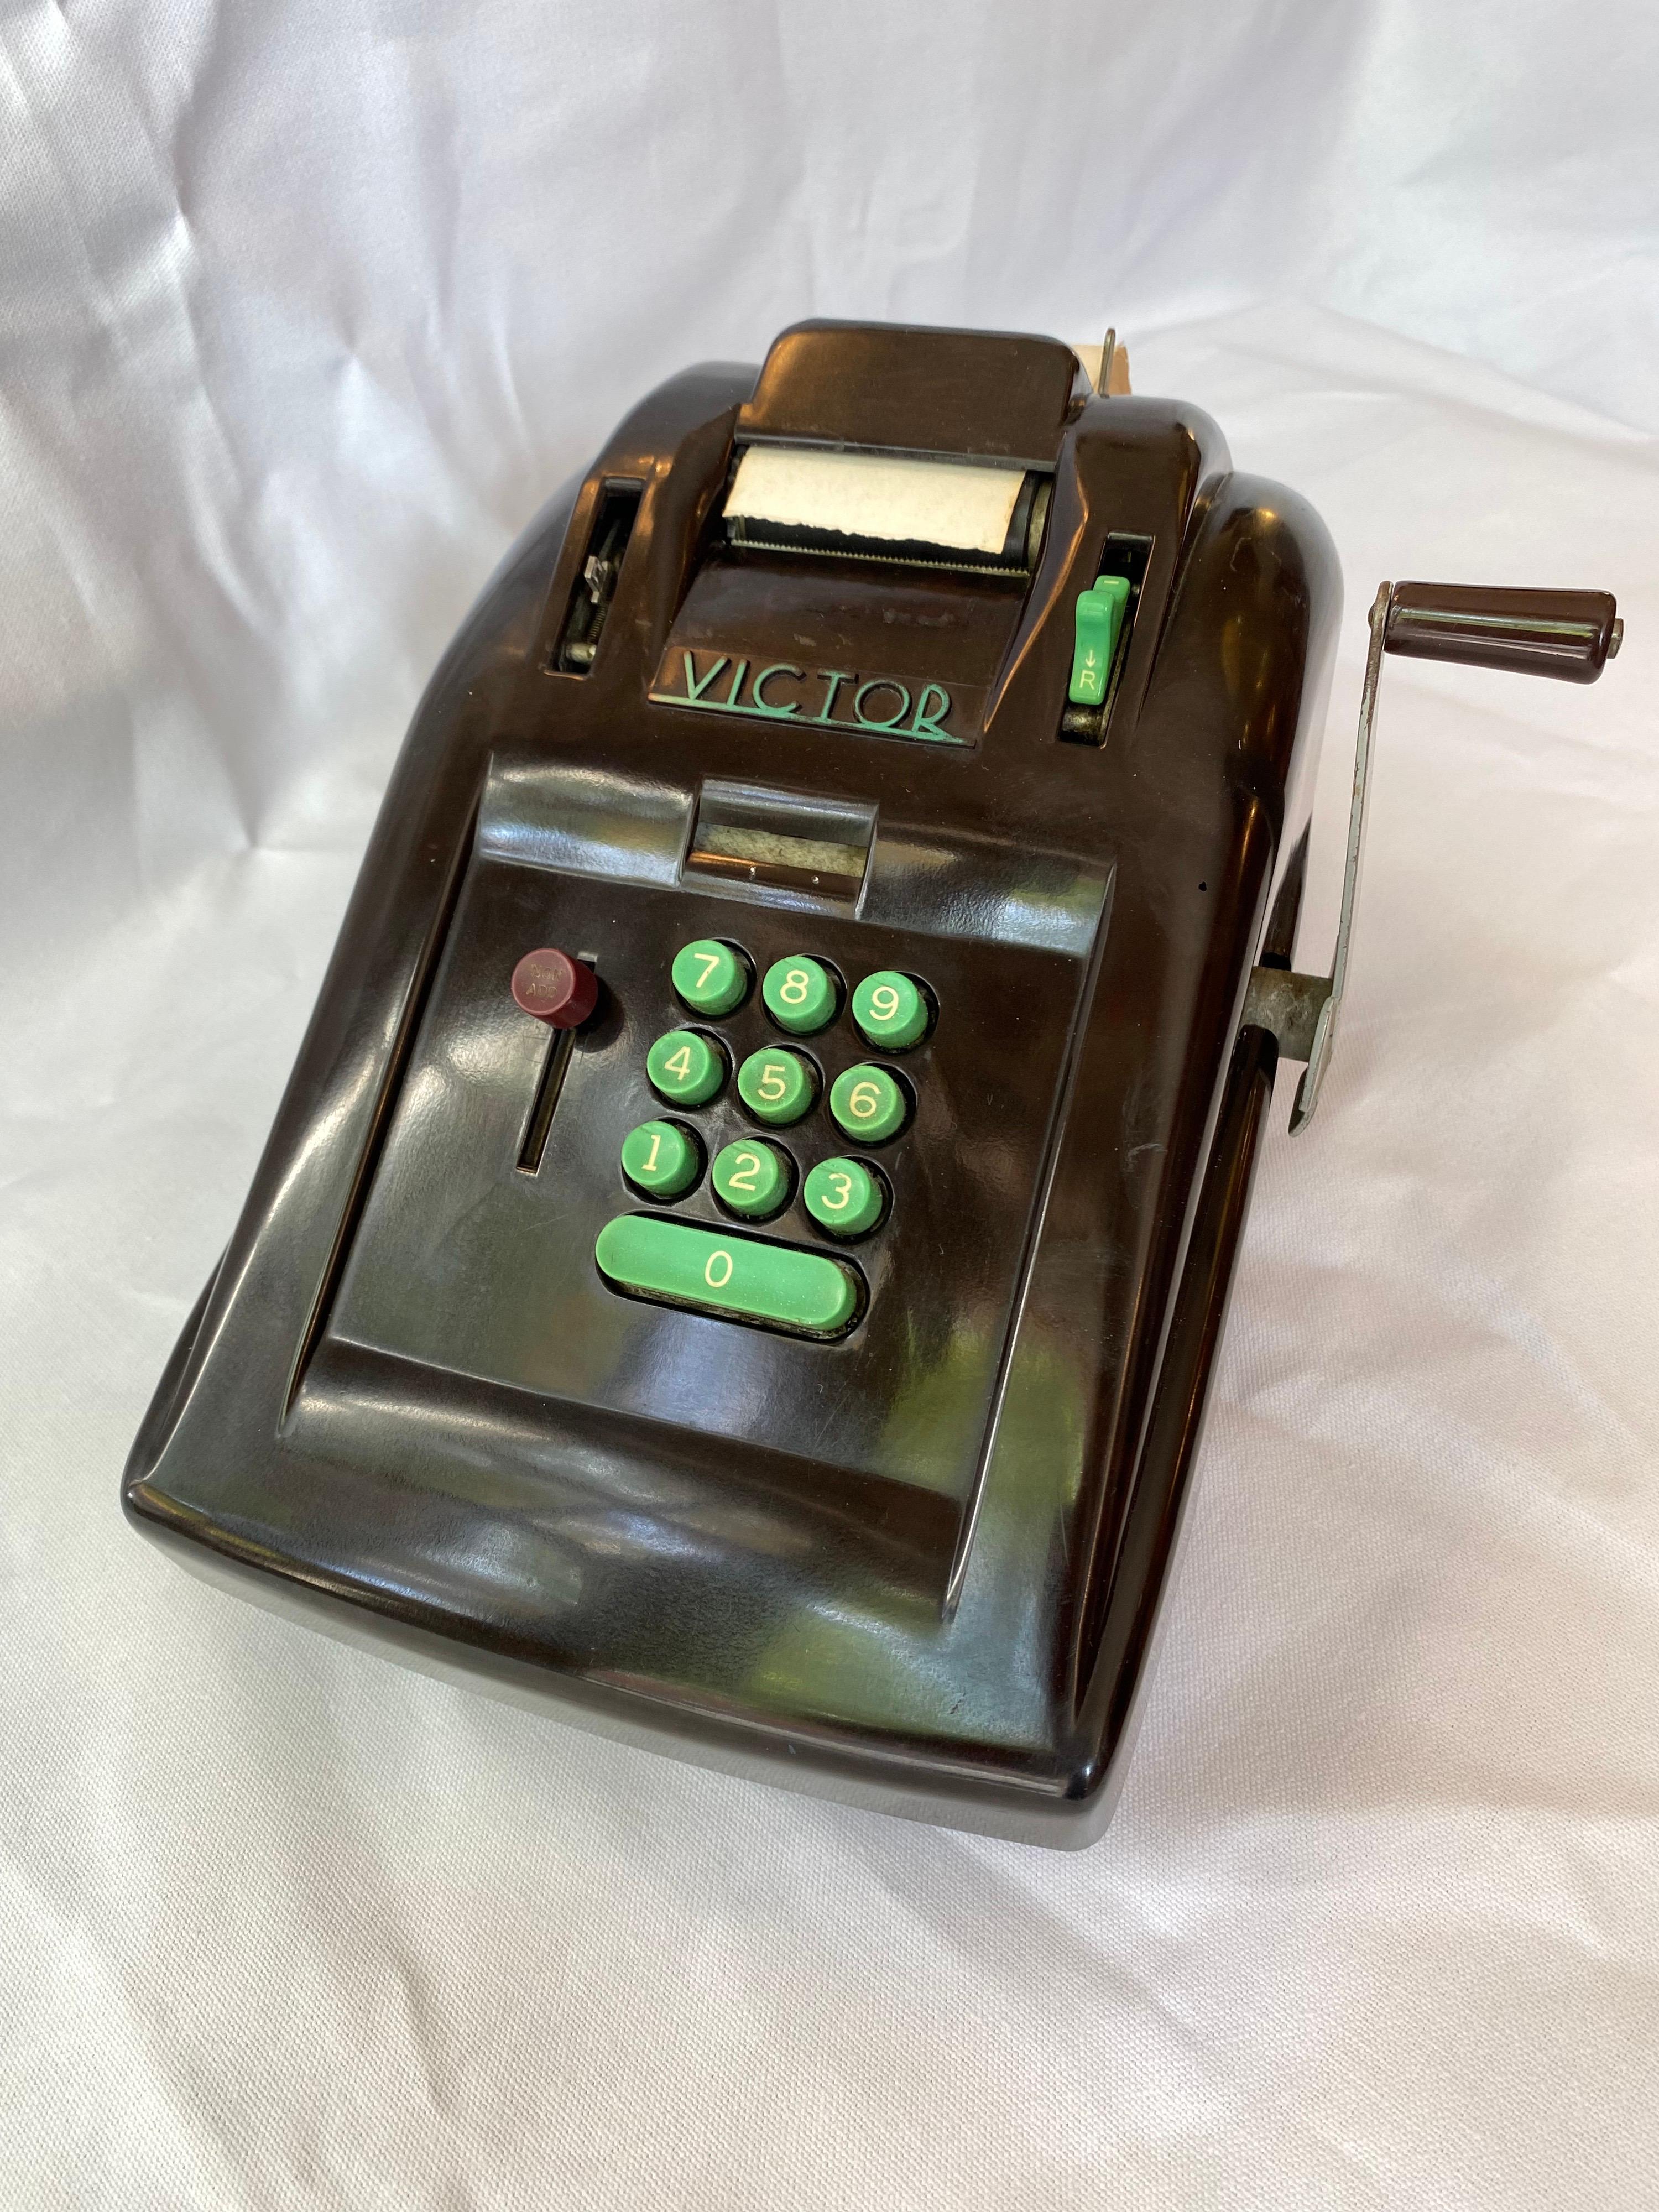 Victor Bakelite Adding Machine. Machine Age, Streamlined Design makes this a Classic of the Period! Designed in 1937 in Bakelite. Dark Brown Bakelite Body with Green keys. Missing one knob, as seen in photos, but still a great looking Art Deco